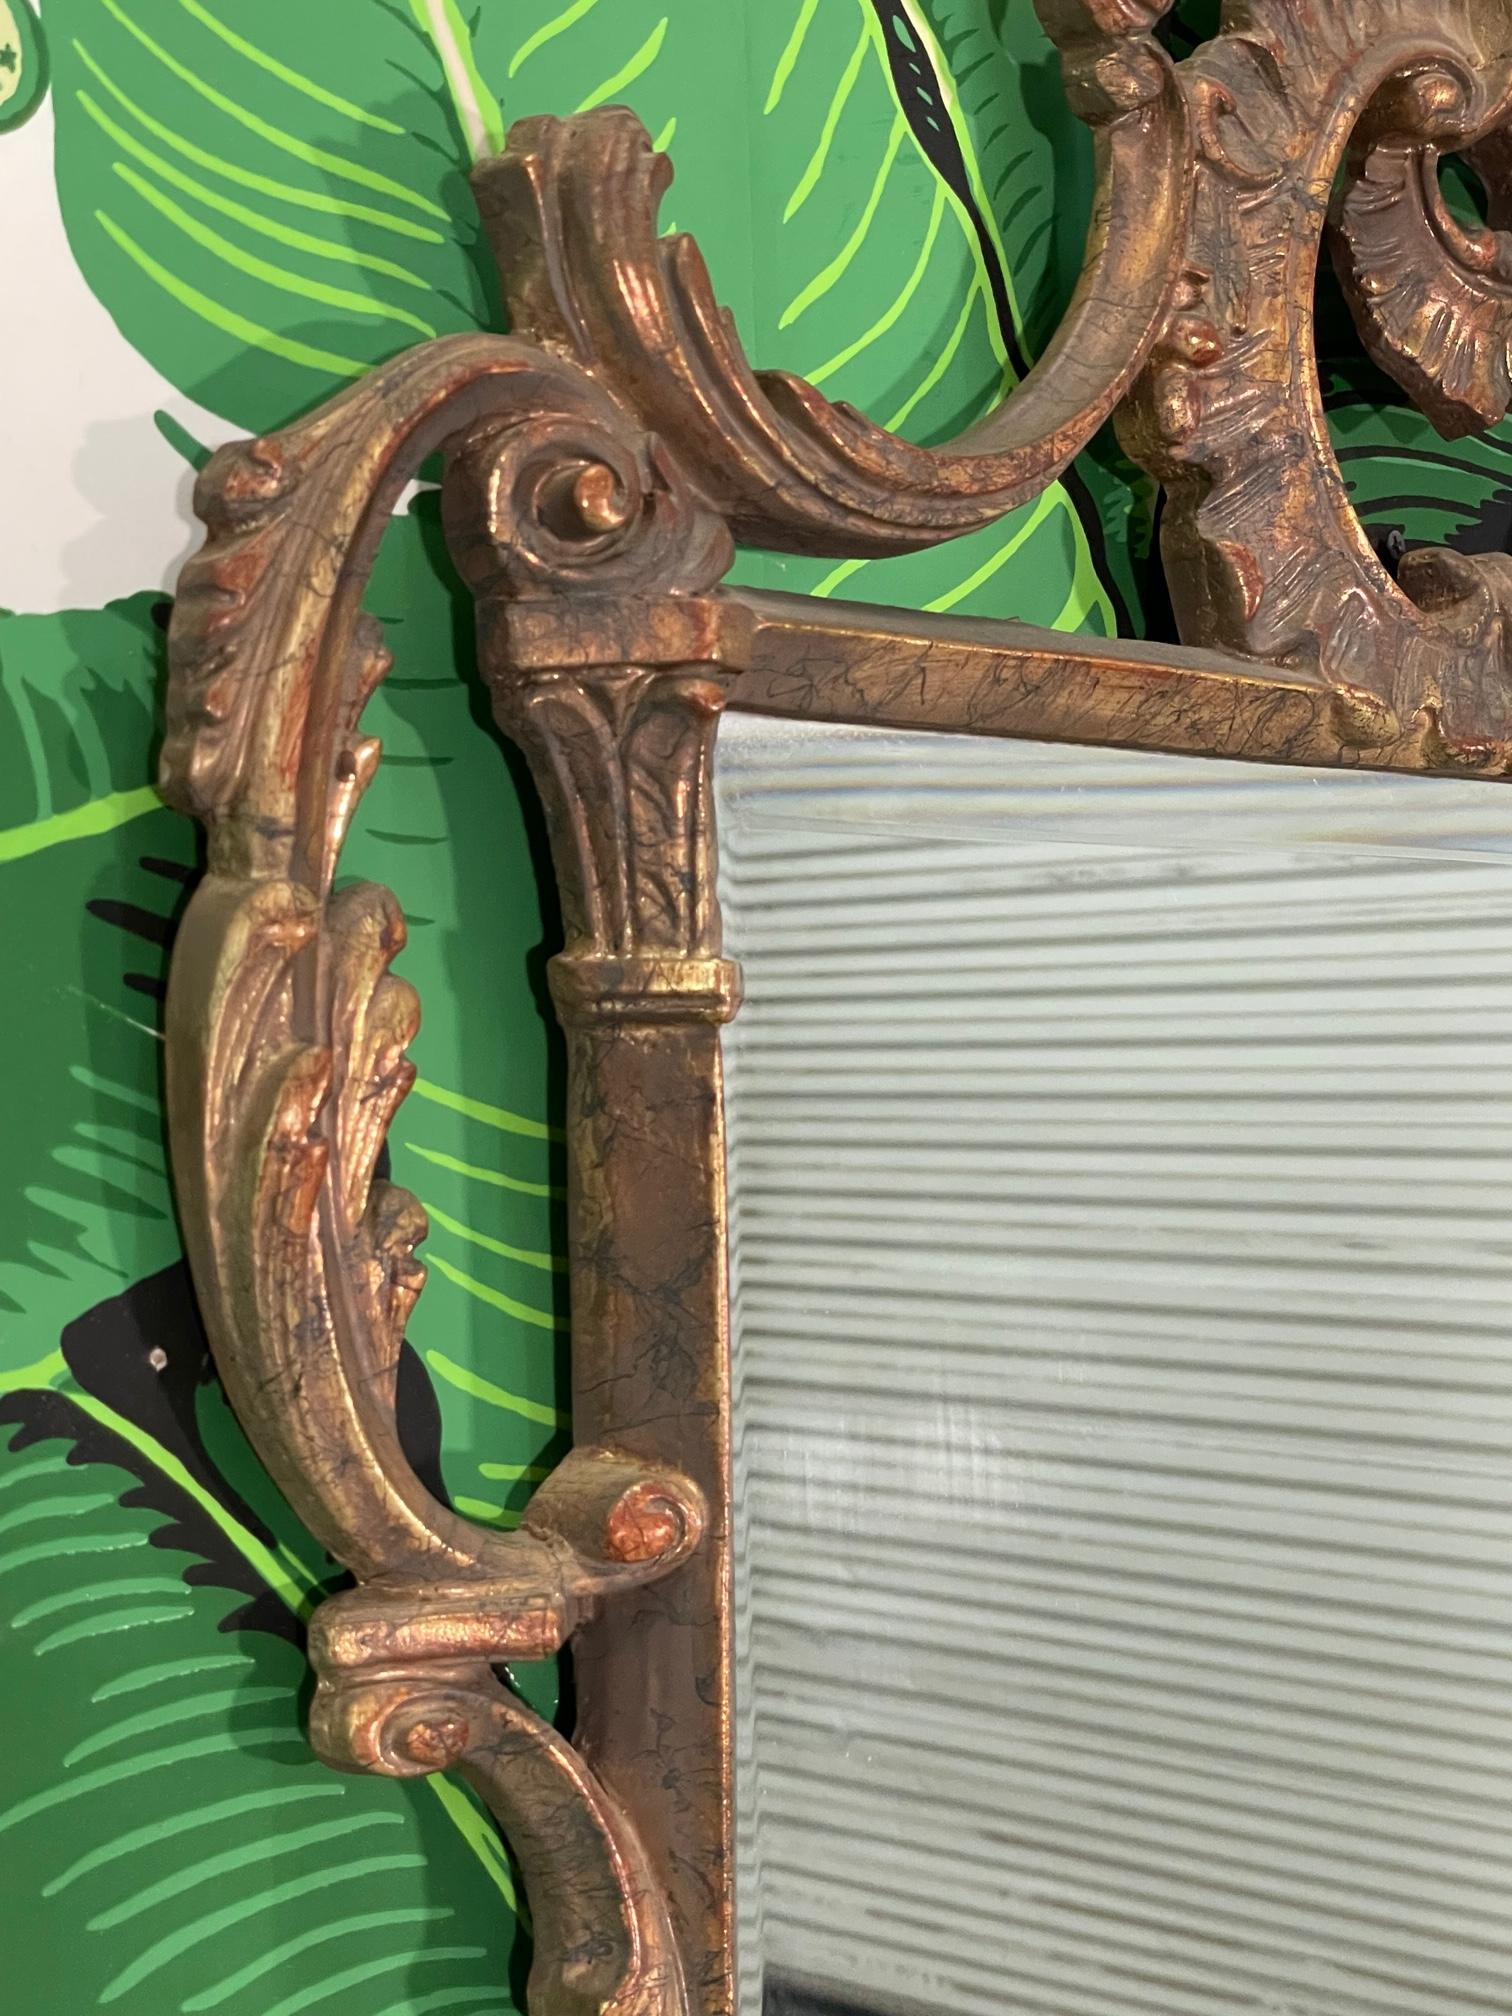 Rococo style wall mirror features ornate sculptural frame molded from composite resin. Good condition with imperfections consistent with age, see photos for condition details.
For a shipping quote to your exact zip code, please message us.
